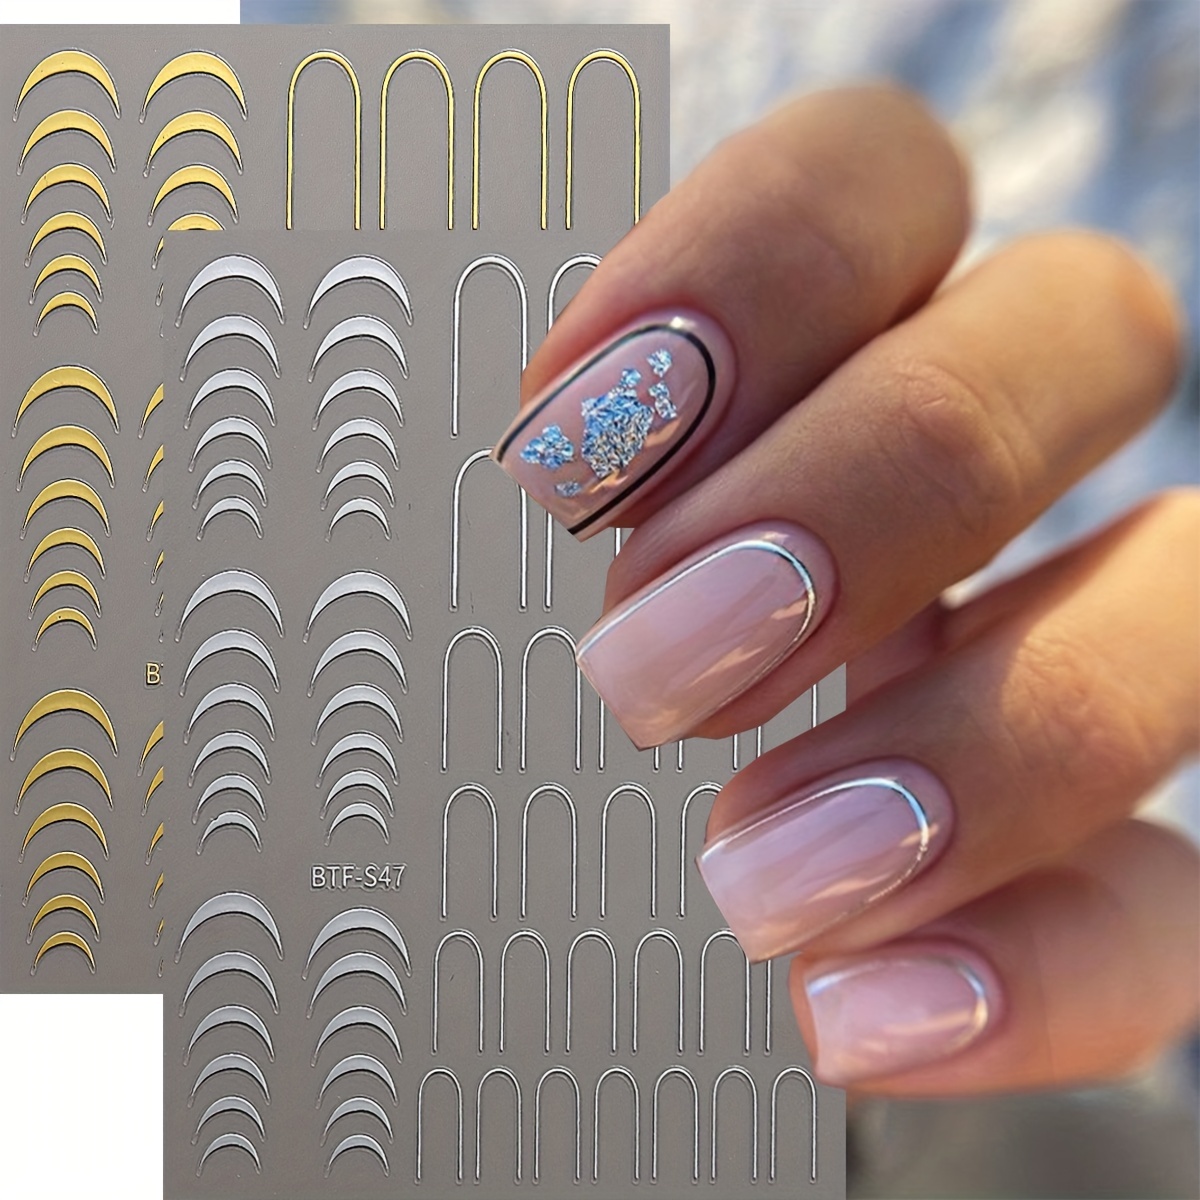  16 Sheet Nail Art Stickers Decals, Luxury Diamond Design 3D  Gold Holographic Nail Self-Adhesive Decals Customized Metallic Nail Stickers  for Women Girls Salon Home DIY Nail, Nail Tweezers Included : Beauty